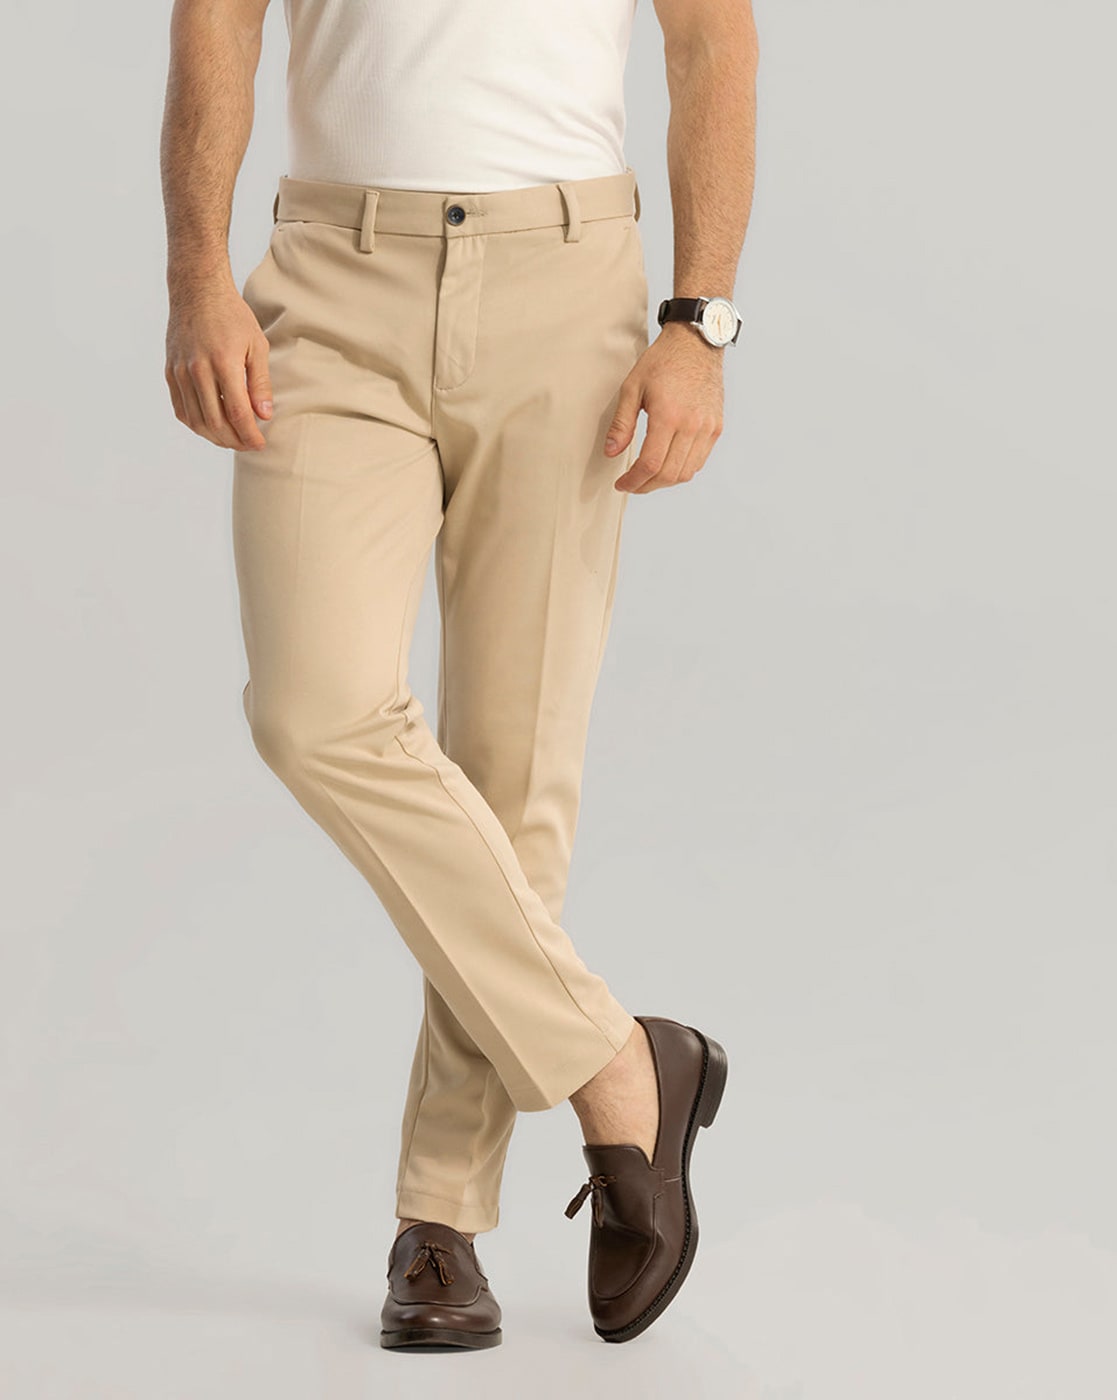 Buy Men's Active Moss Green Stretch Pants Online | SNITCH